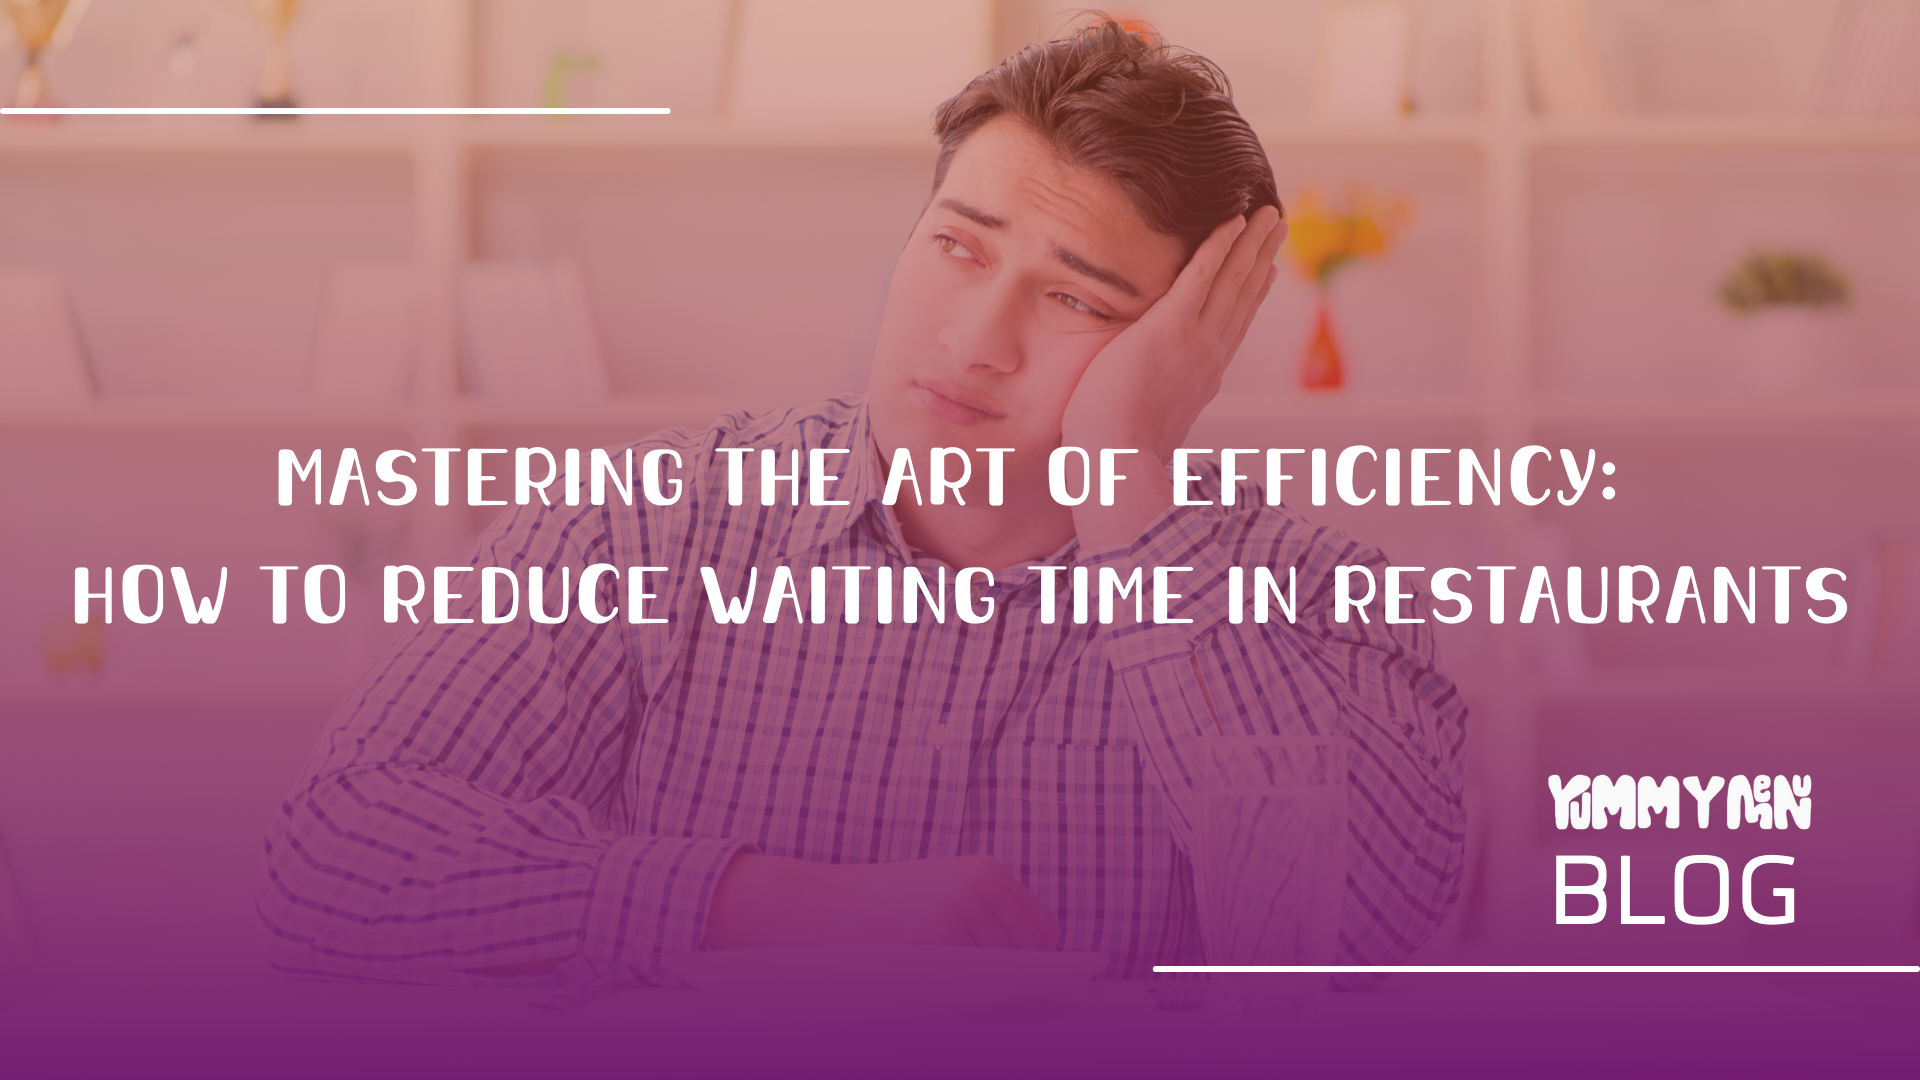 Mastering the Art of Efficiency: How to Reduce Waiting Time in Restaurants